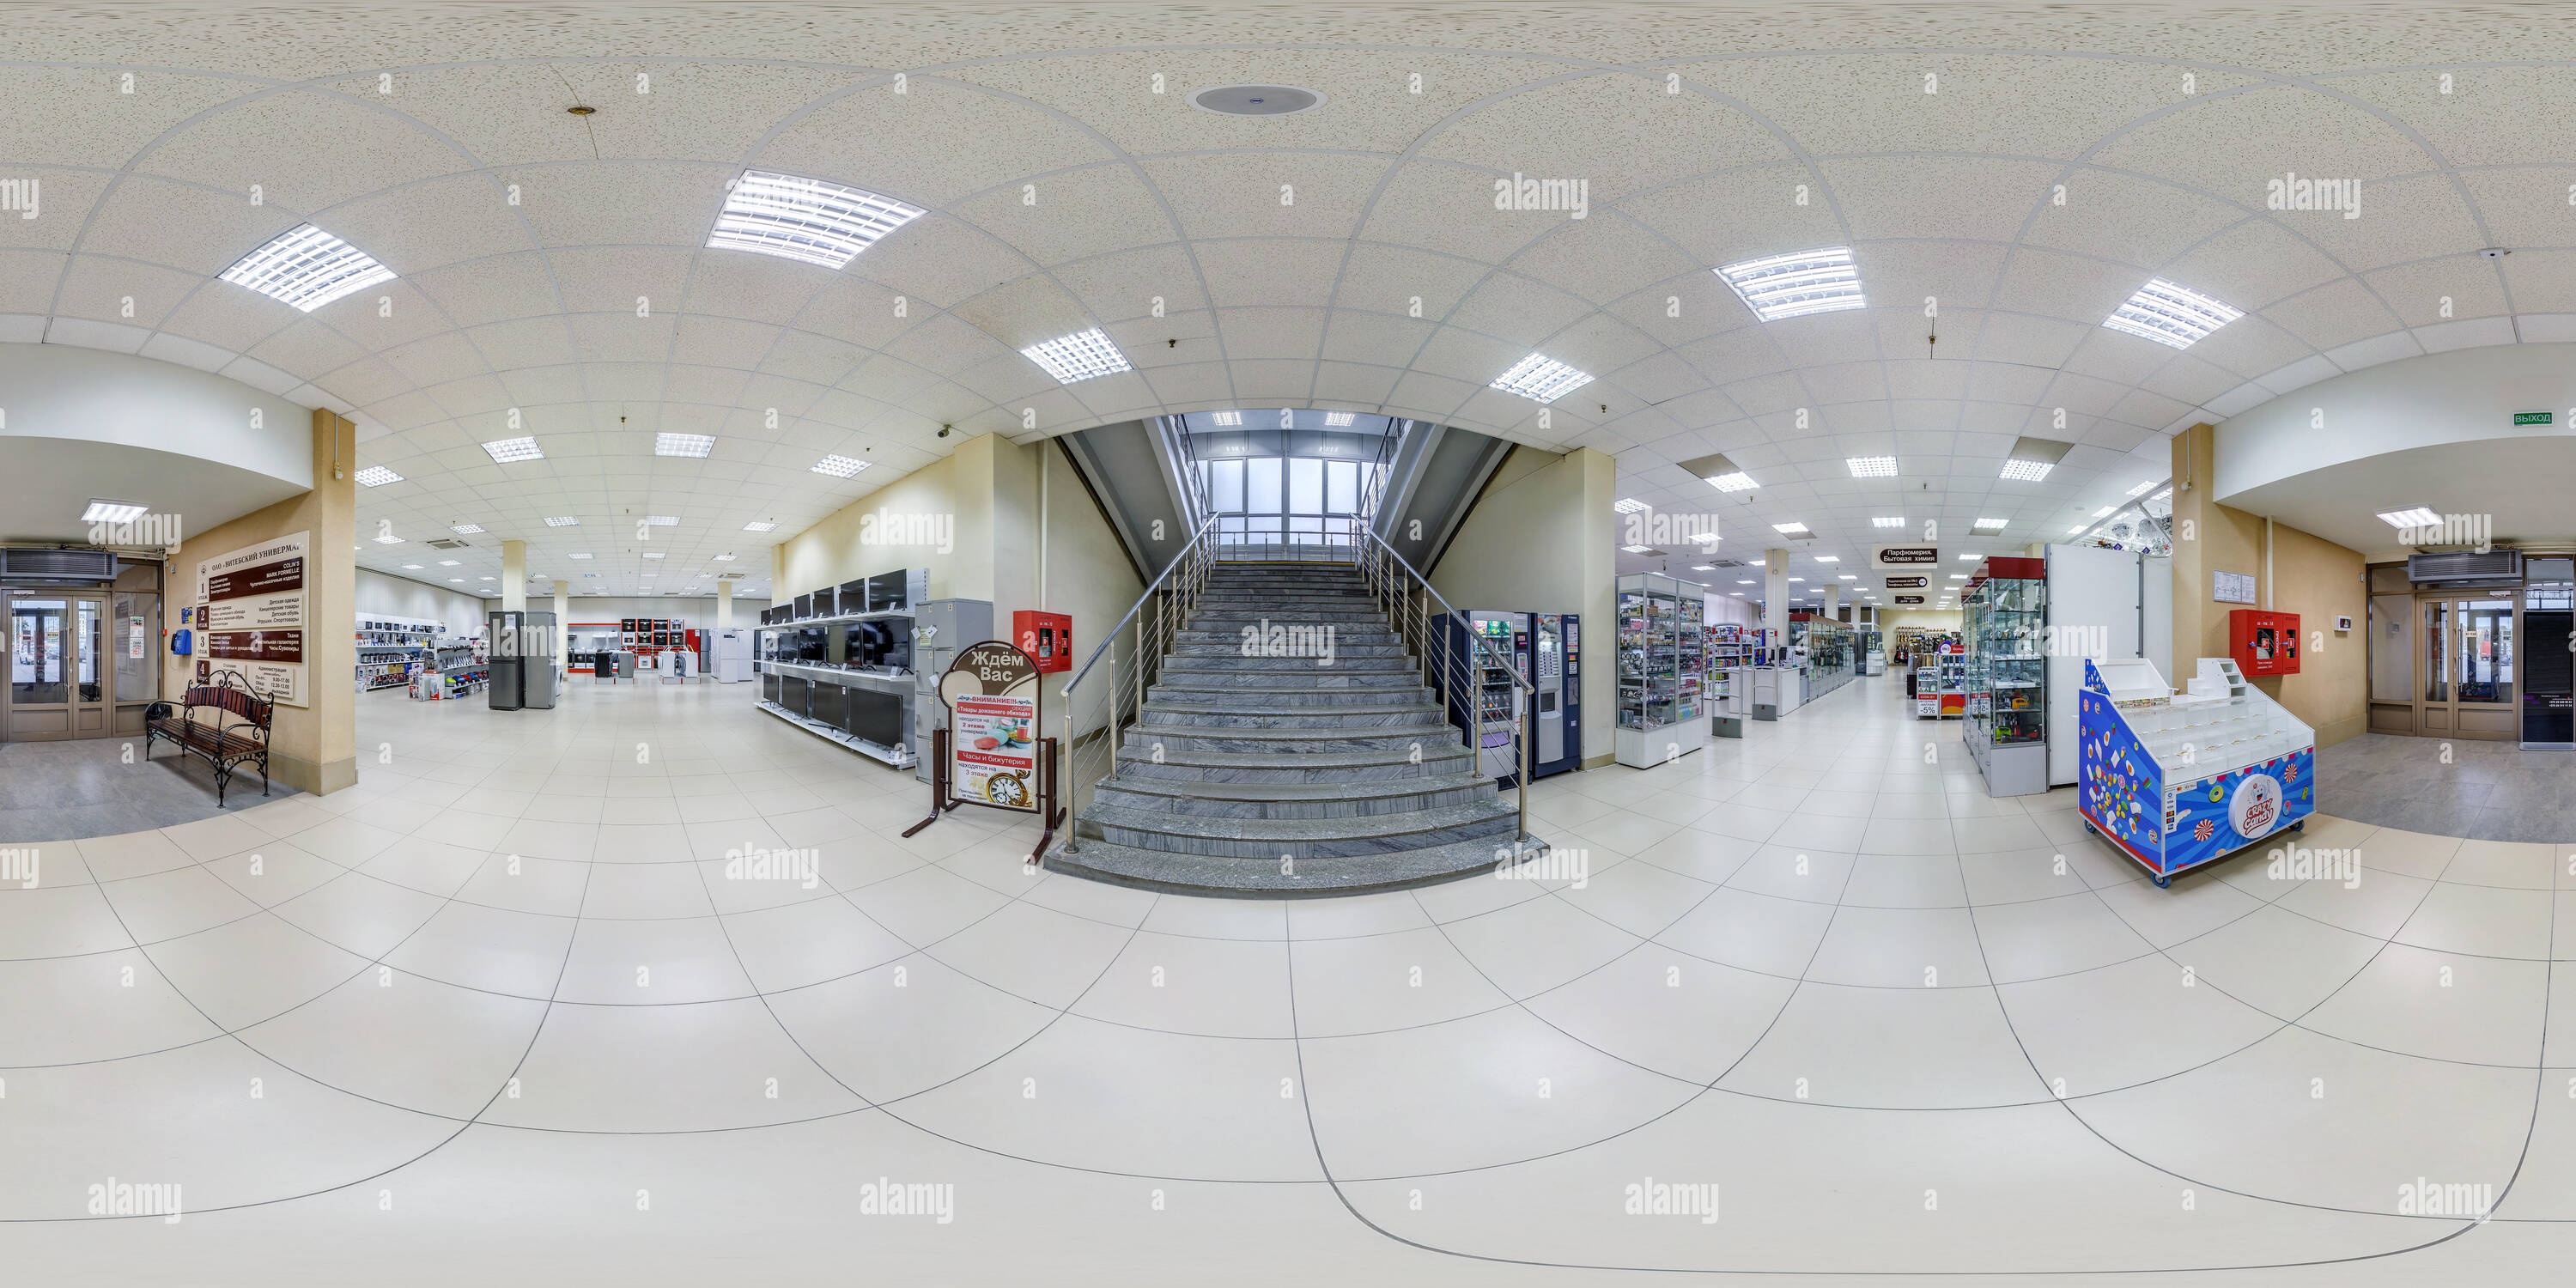 360 degree panoramic view of MINSK, BELARUS - MAY 2018: Full spherical seamless panorama 360 degrees in interior of shop with stairs in elite textiles department store in equirect